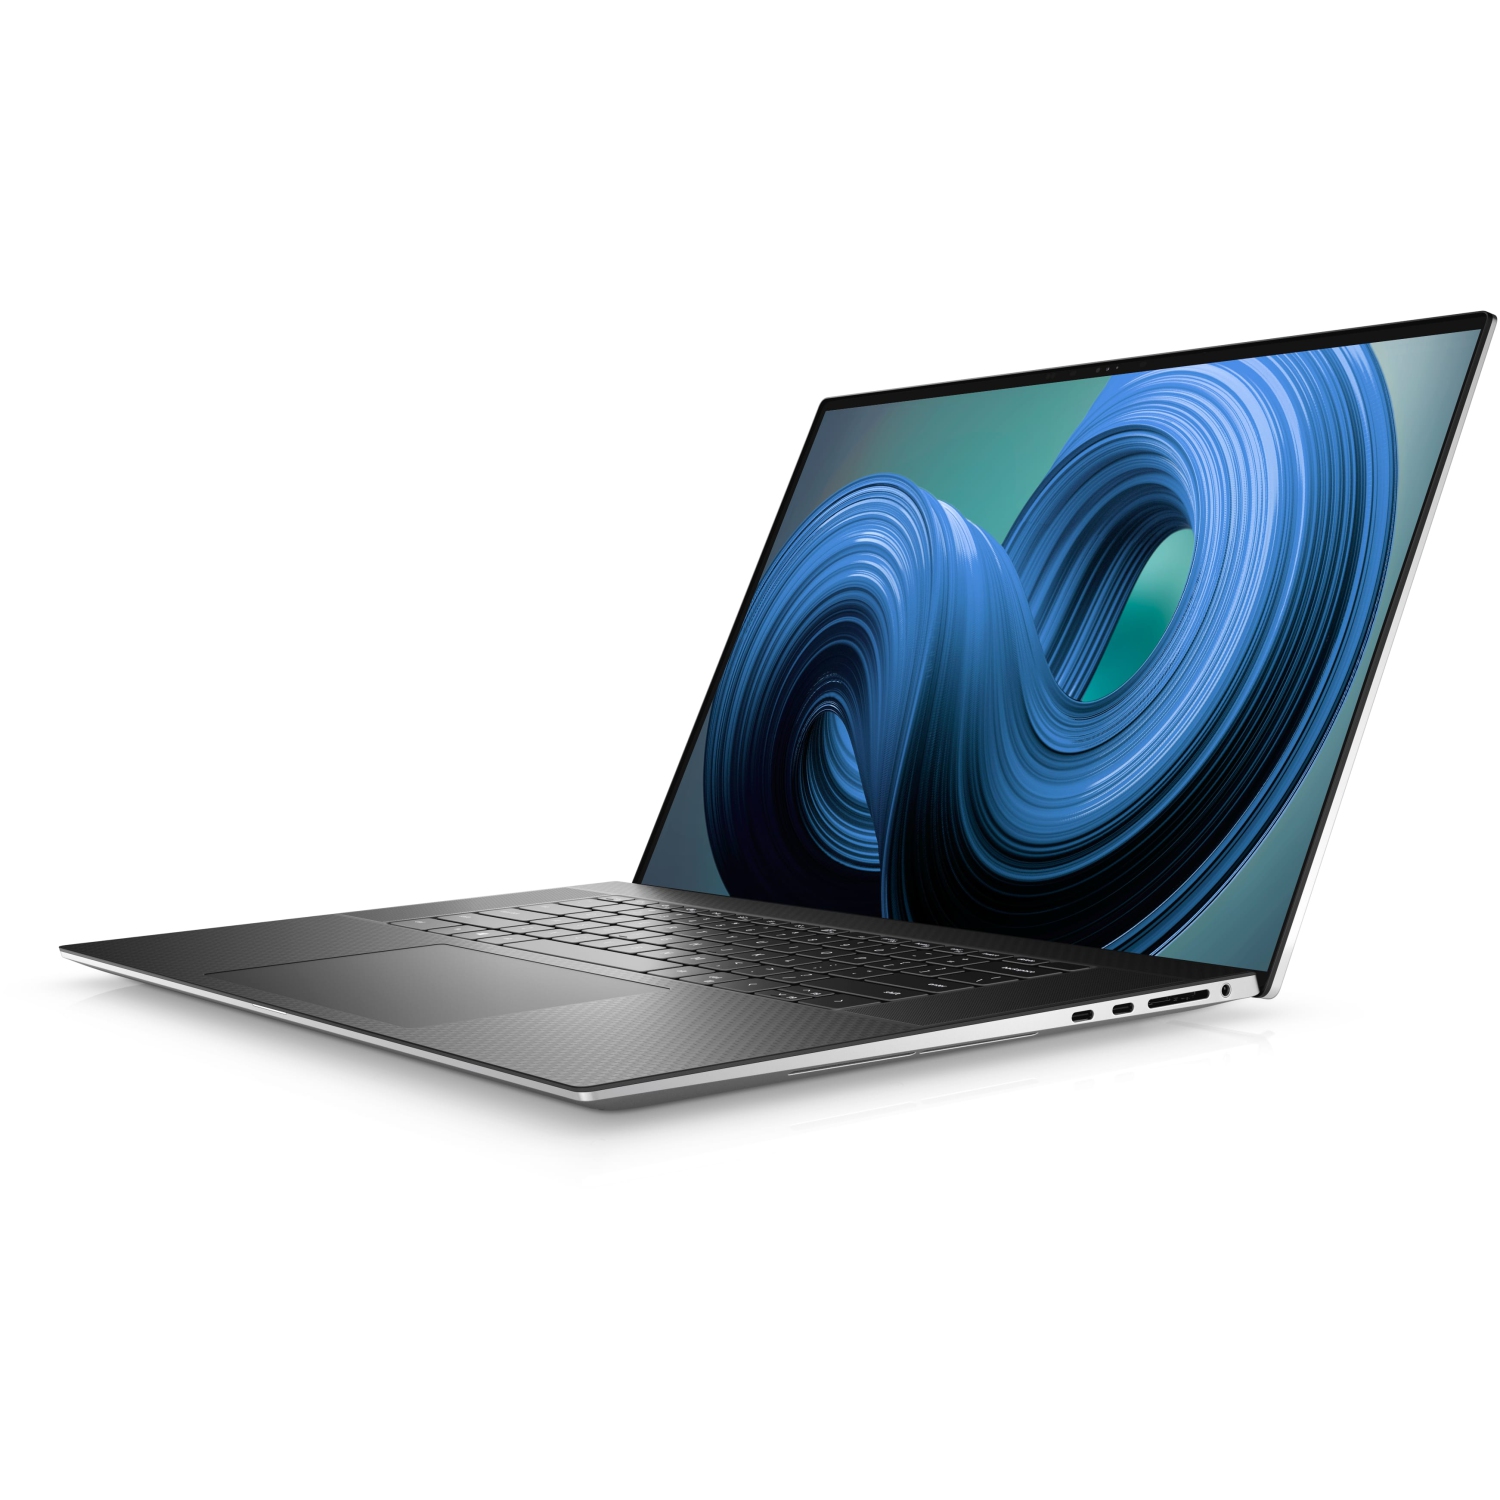 Refurbished (Excellent) – Dell XPS 9720 Laptop (2022) | 17" 4K Touch | Core i7 - 8TB SSD - 64GB RAM - RTX 3050 | 14 Cores @ 4.7 GHz - 12th Gen CPU